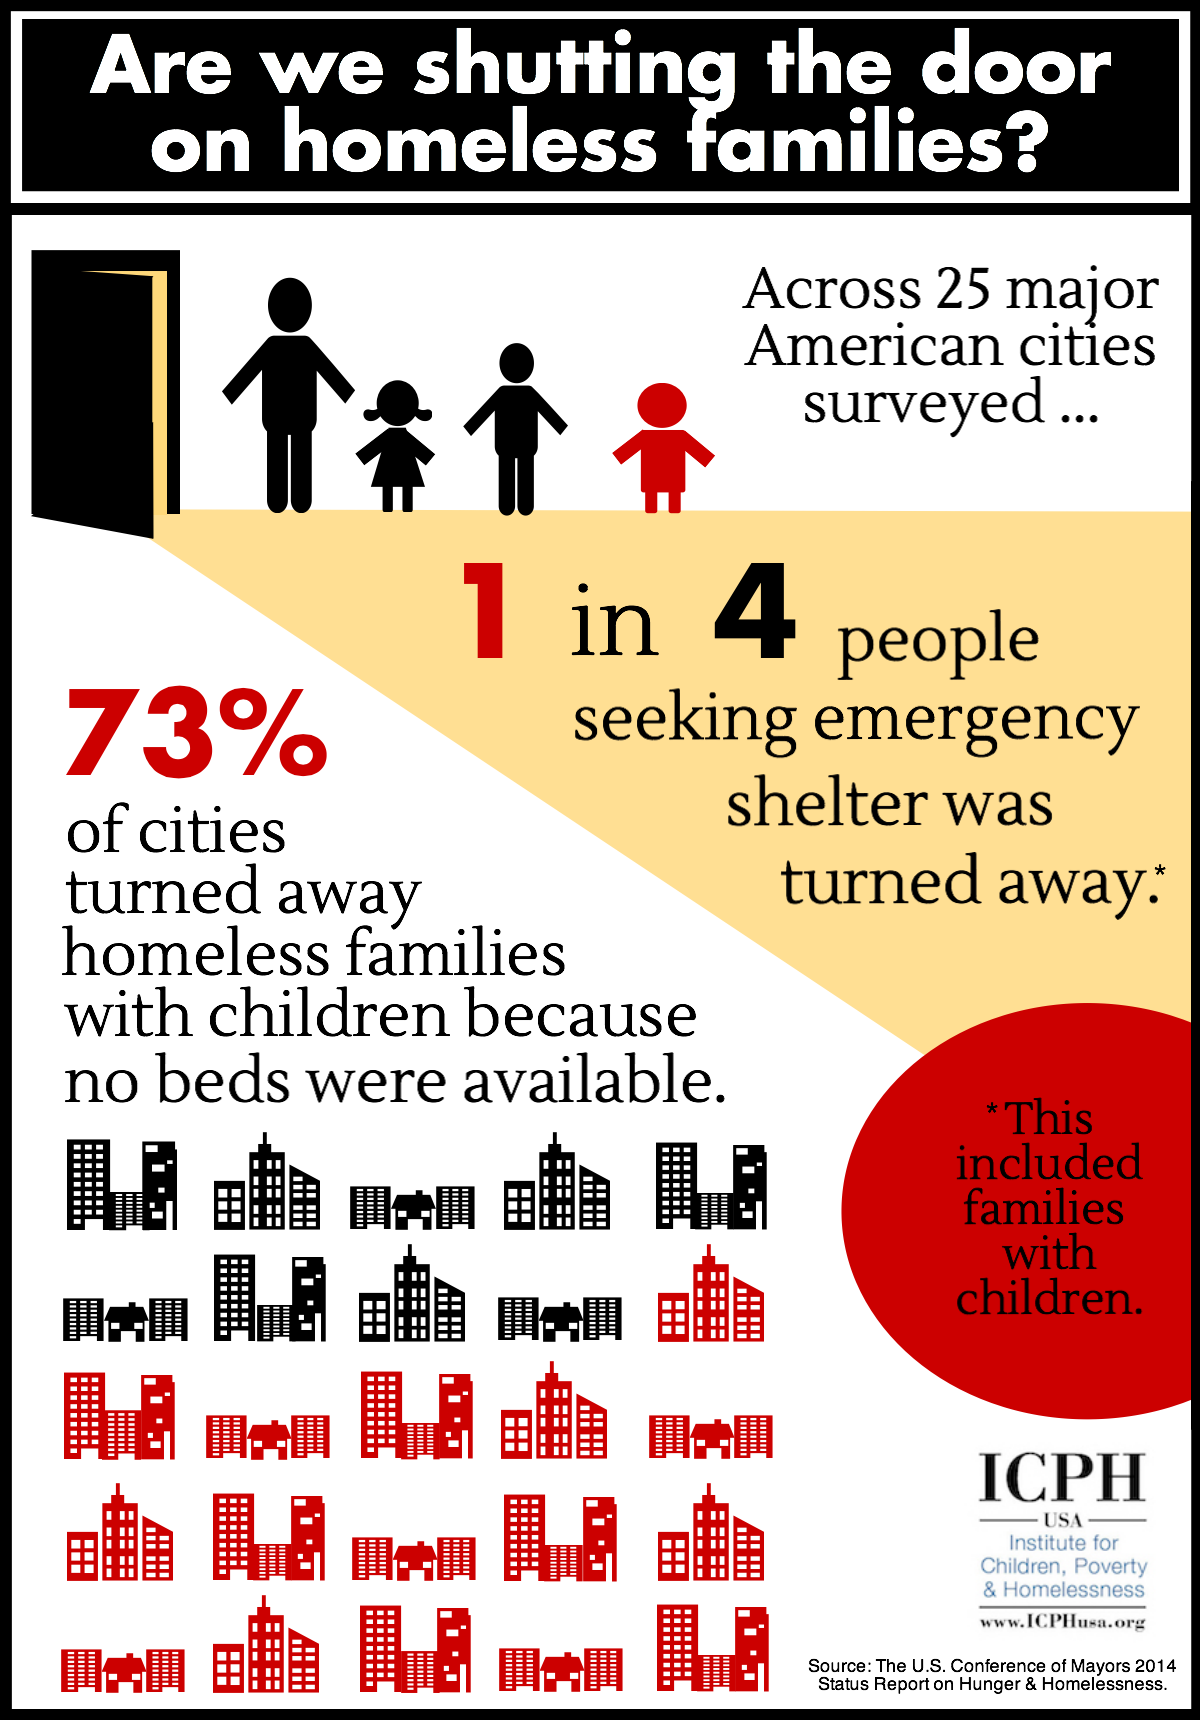 Infographic by the Institute for Children, Poverty & Homelessness